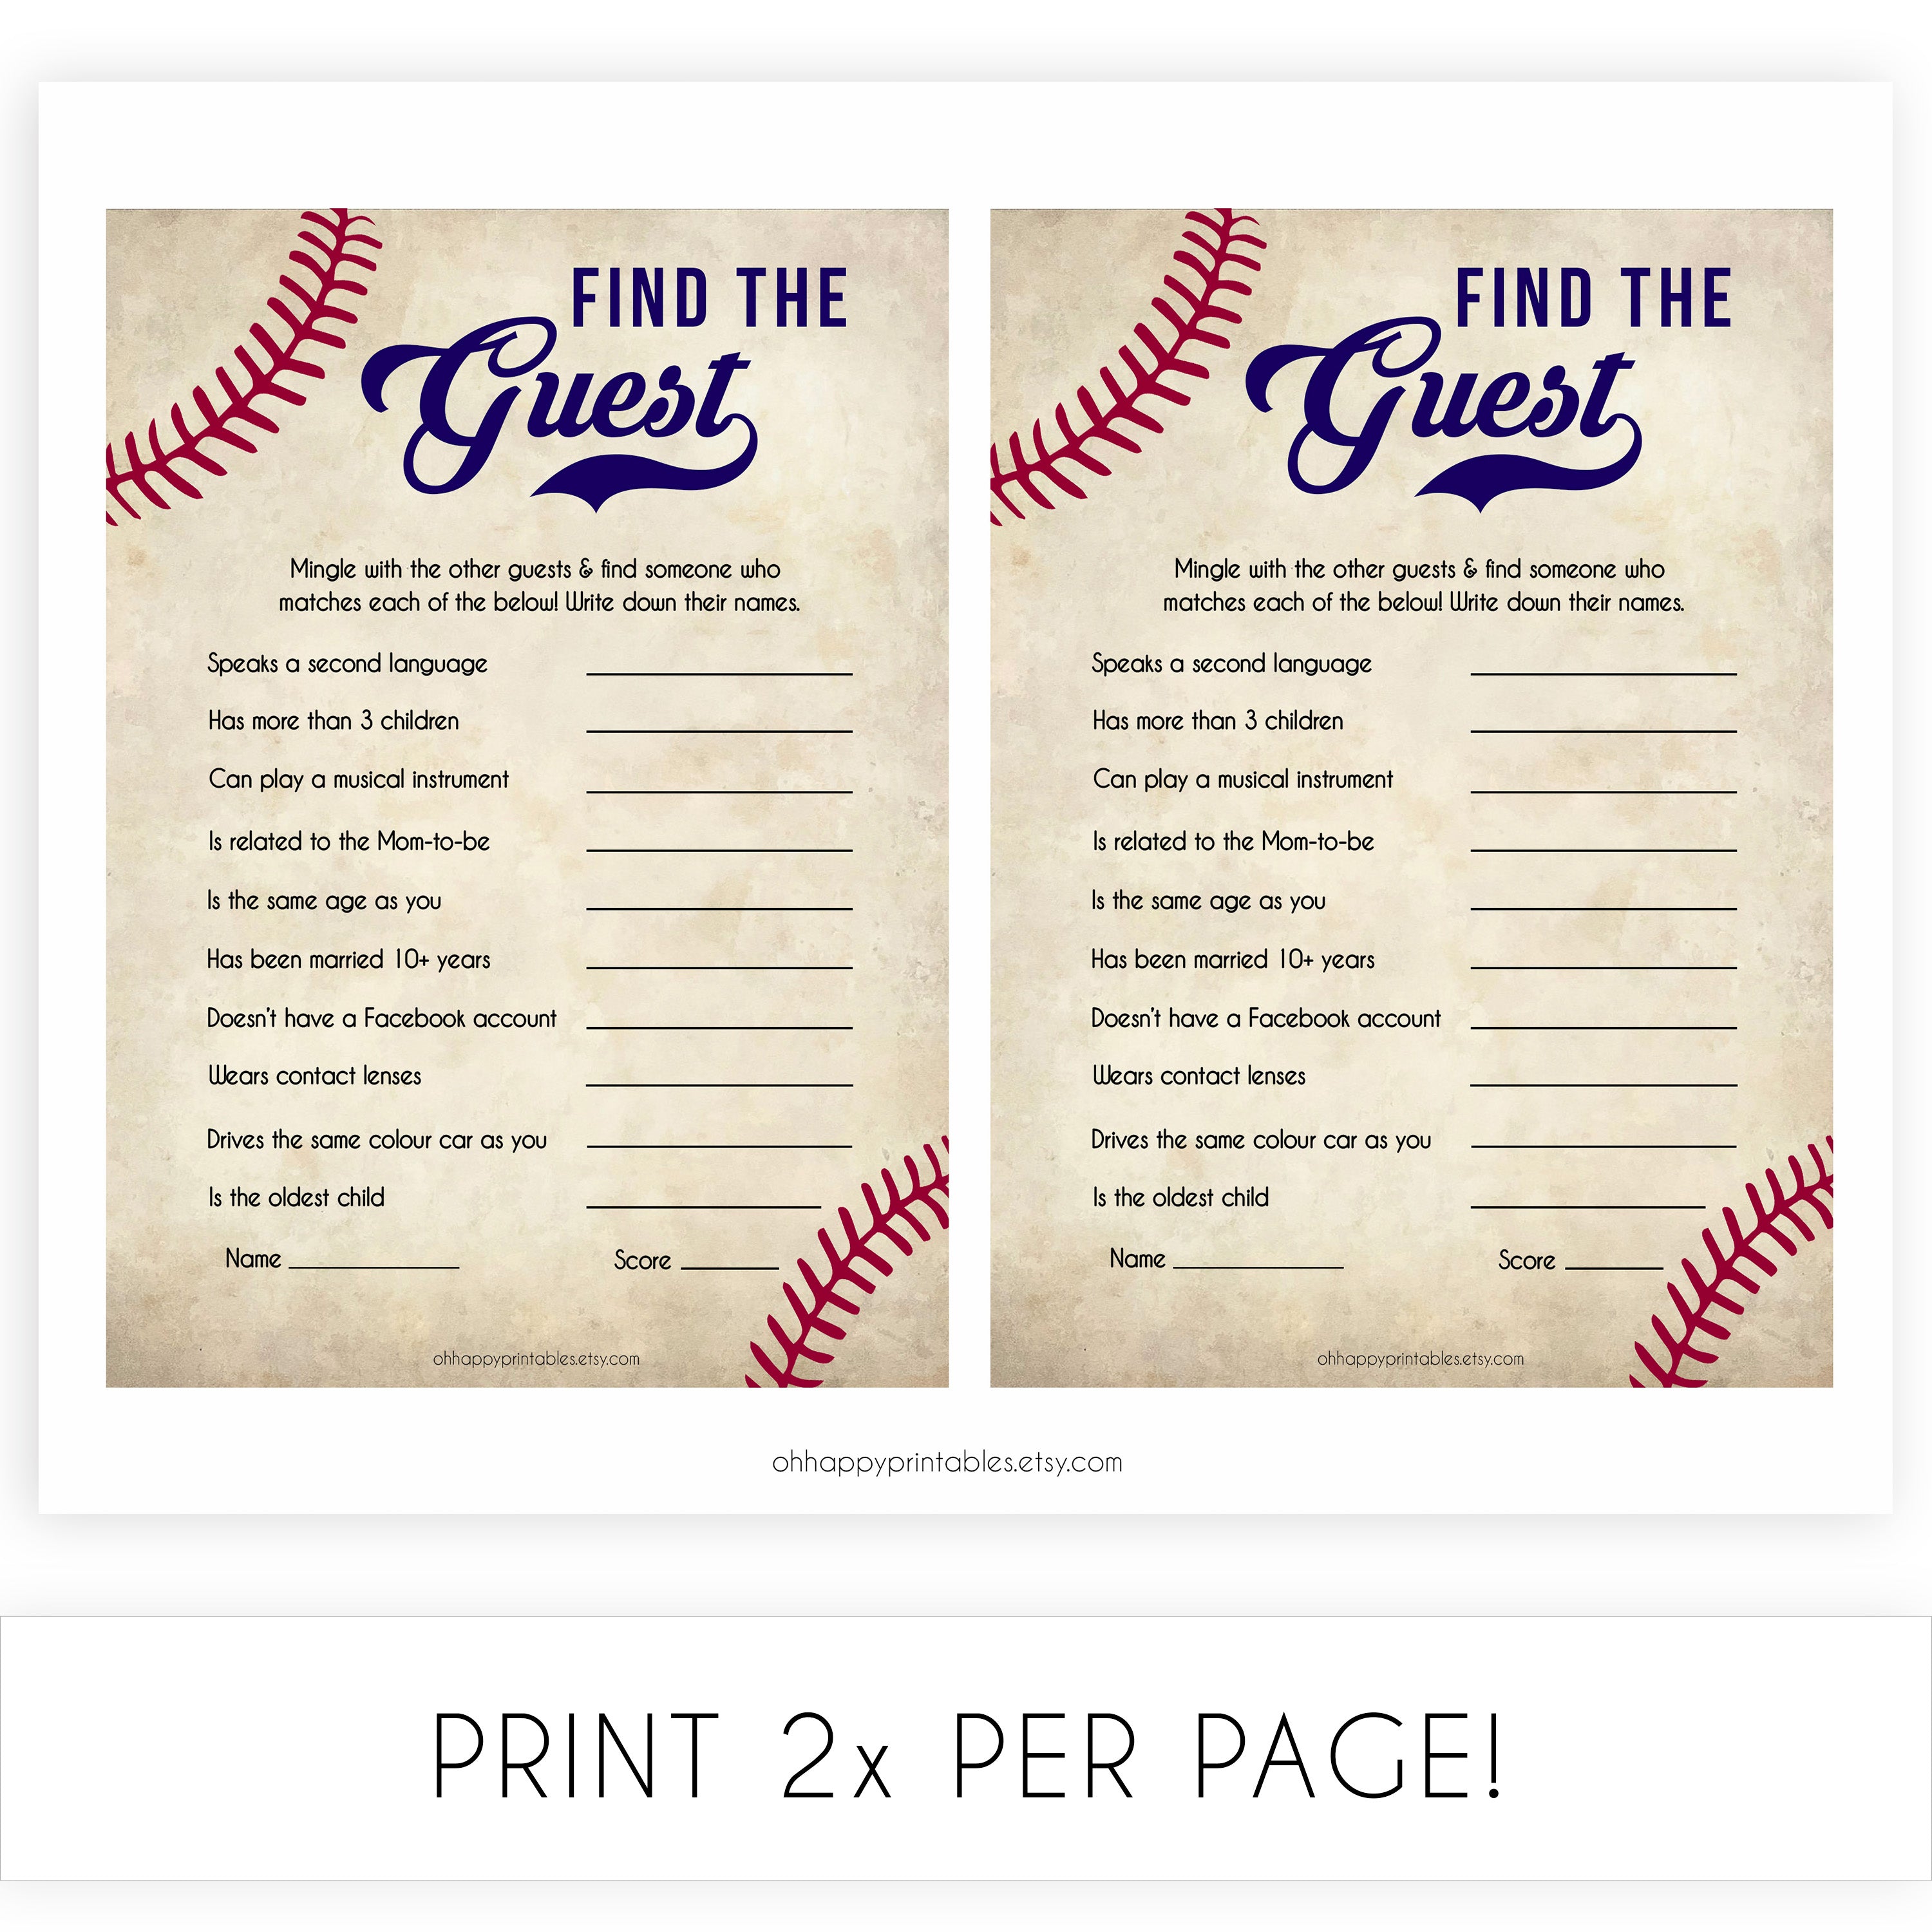 Baseball Find The Guest Baby Shower Game, Find the Guest, Ice Breaker Game, Baby Shower Games, Baseball Baby Shower, Find the Guest, printable baby shower games, fun baby shower games, popular baby shower games